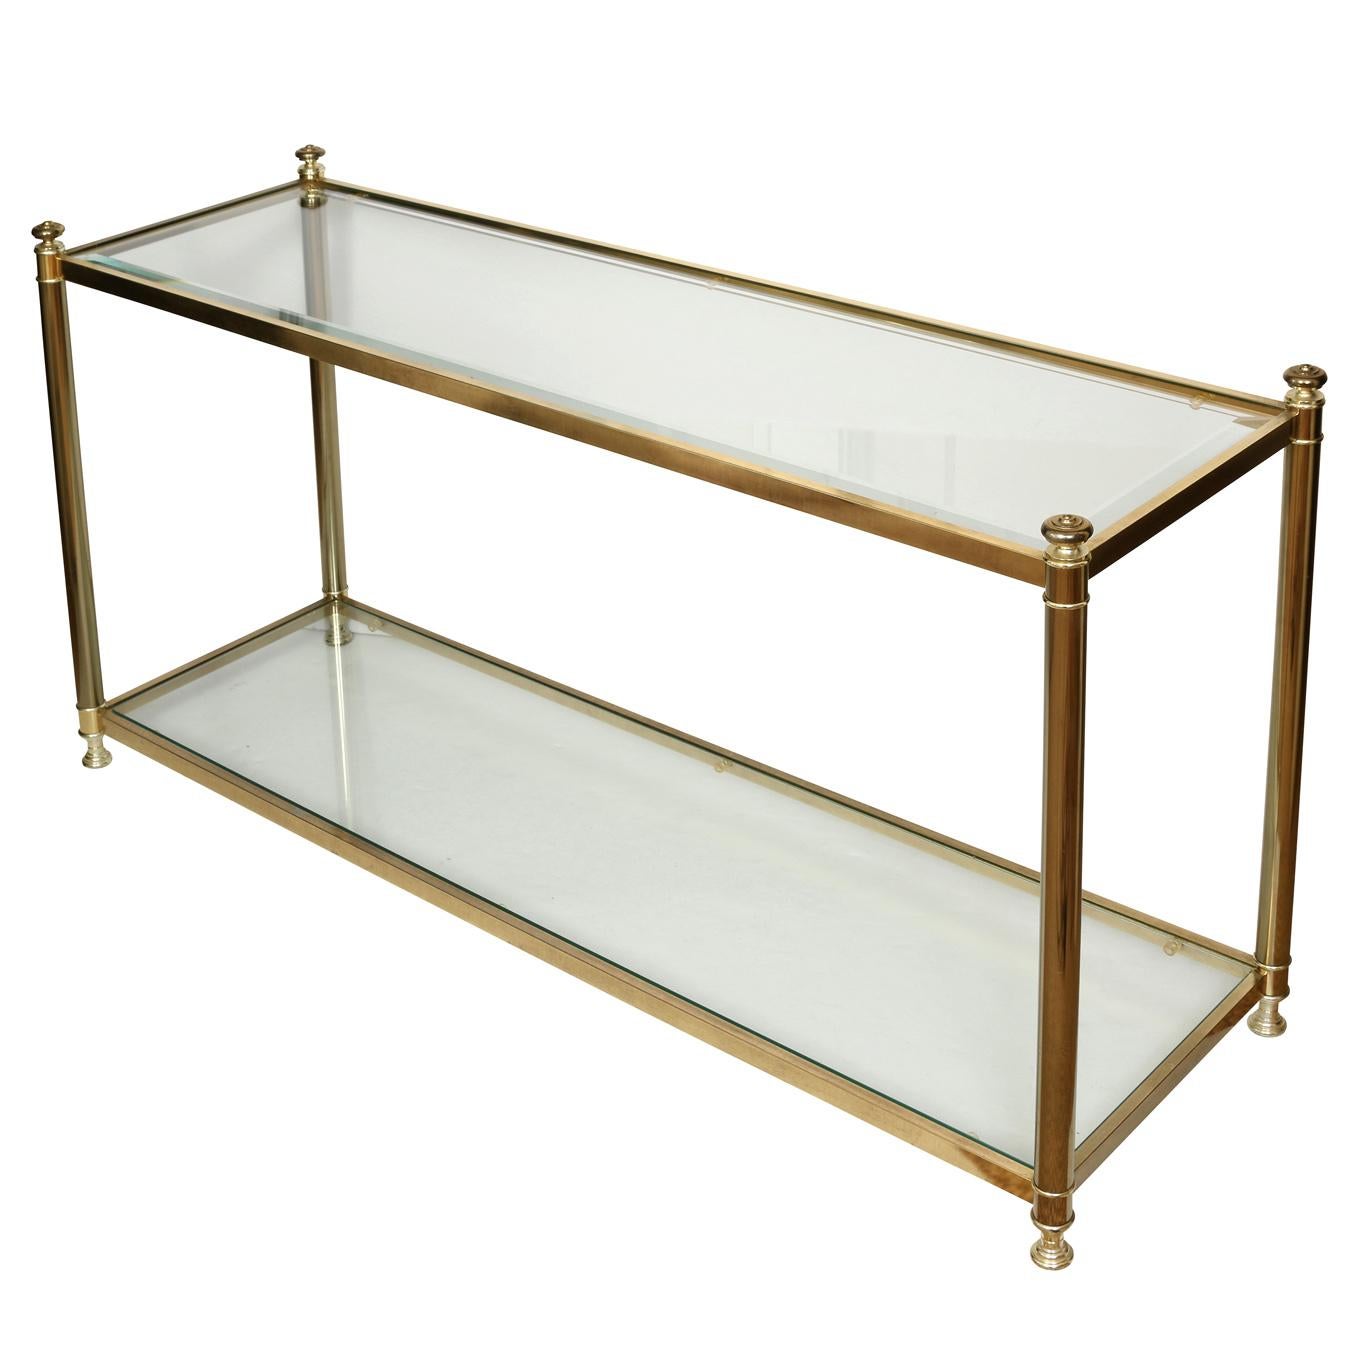 20th Century Vintage Regency Style Brass & Glass Console Table For Sale